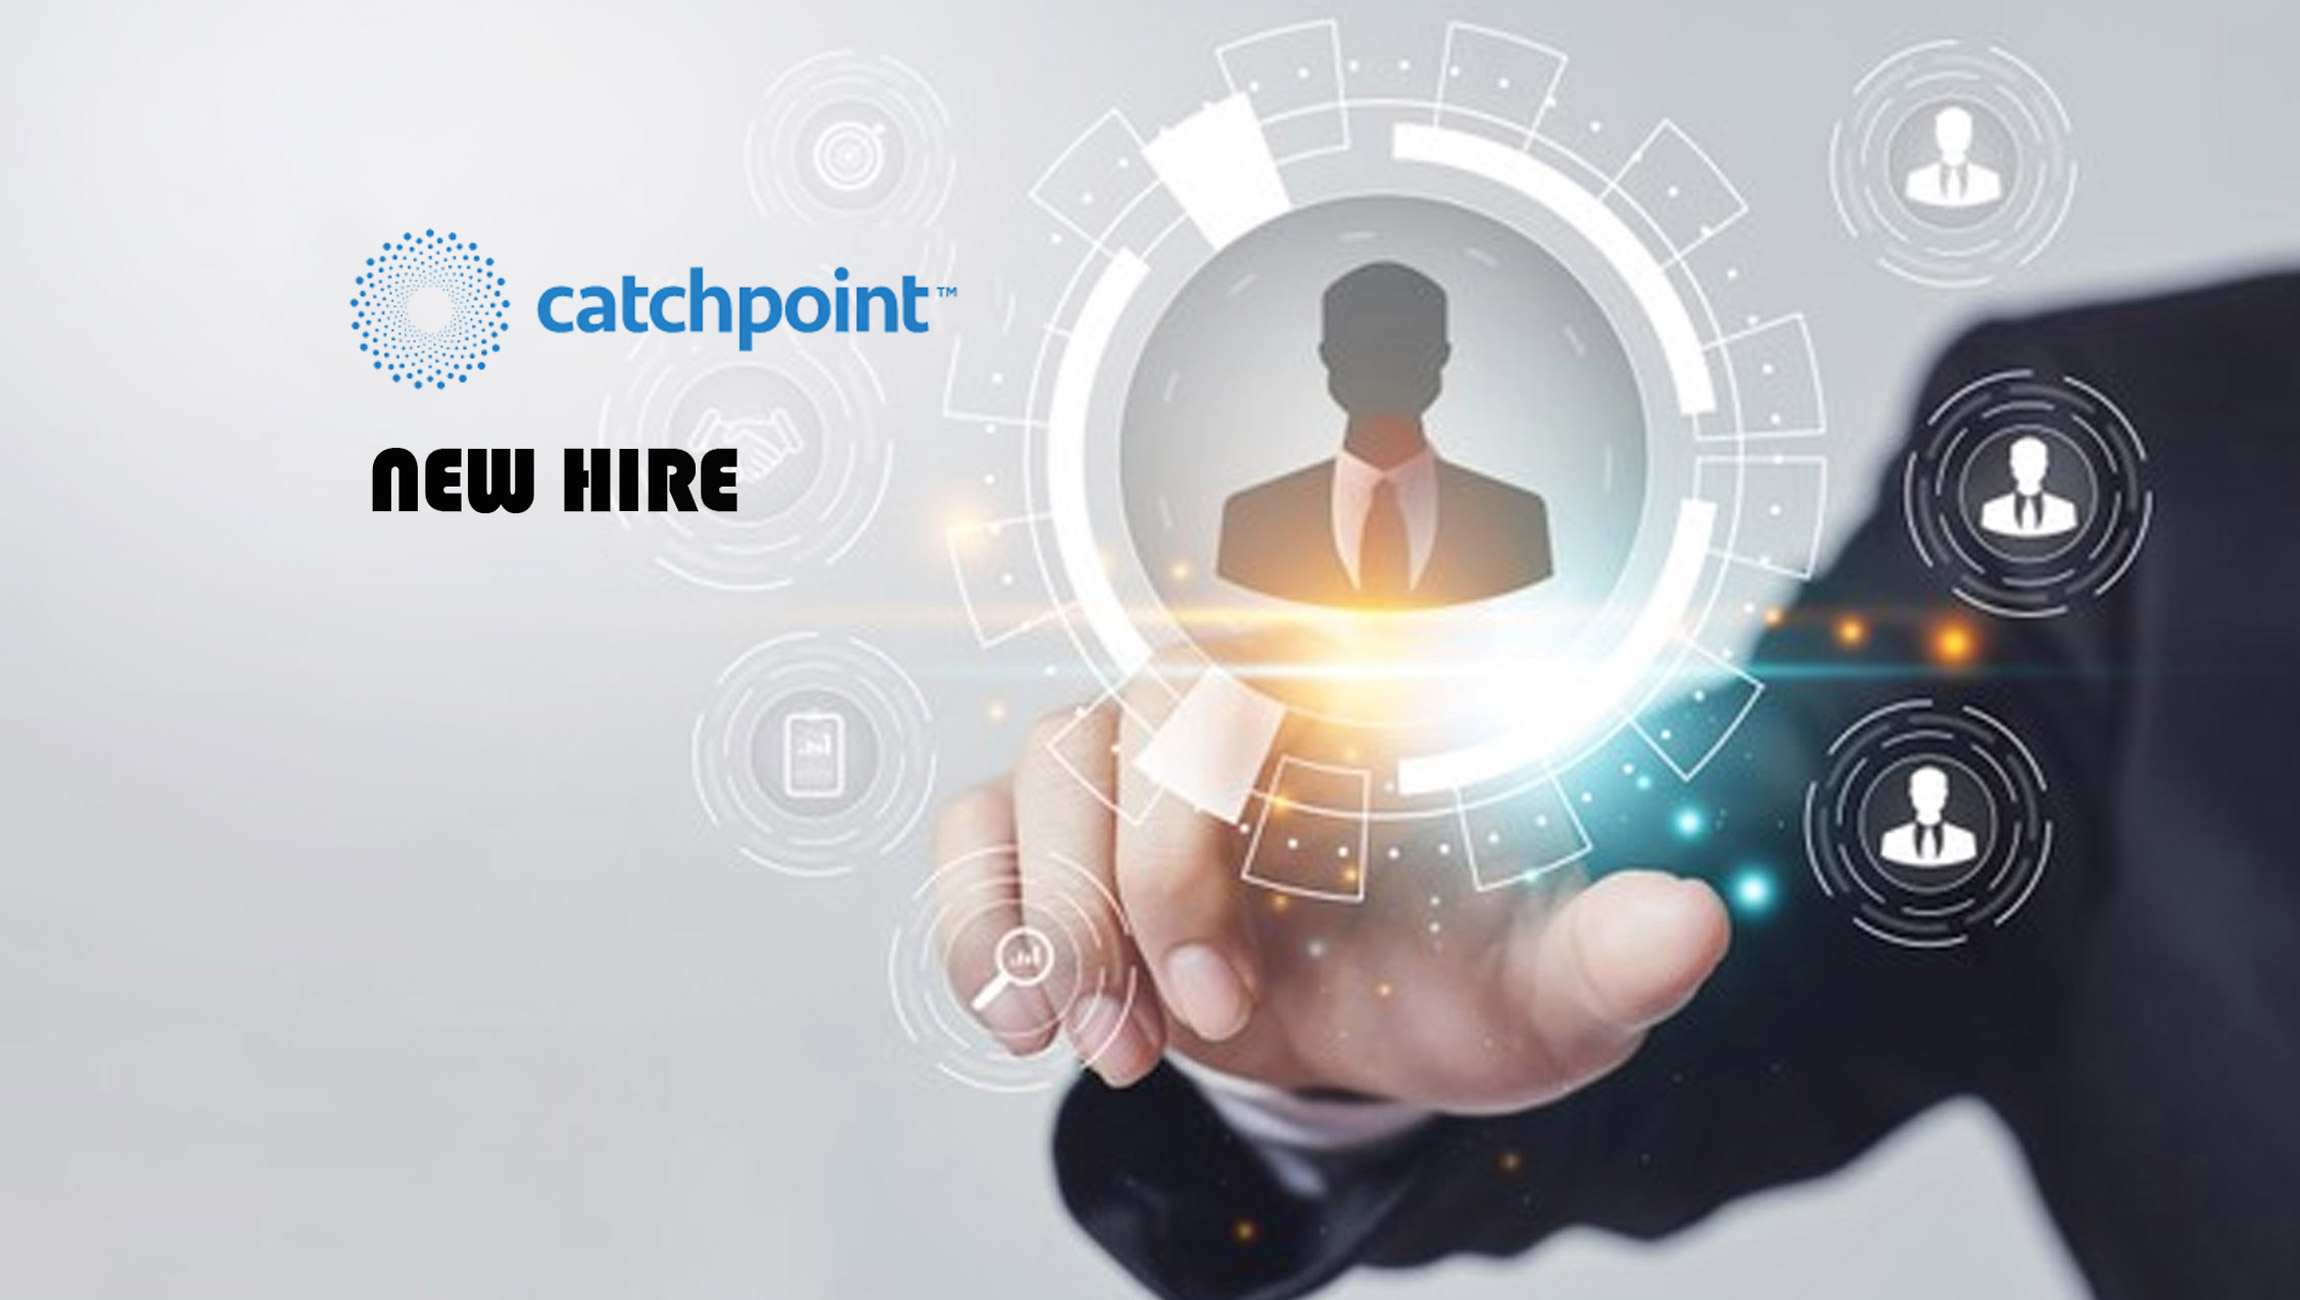 Dave Temkin Joins Catchpoint As Advisor To The Board